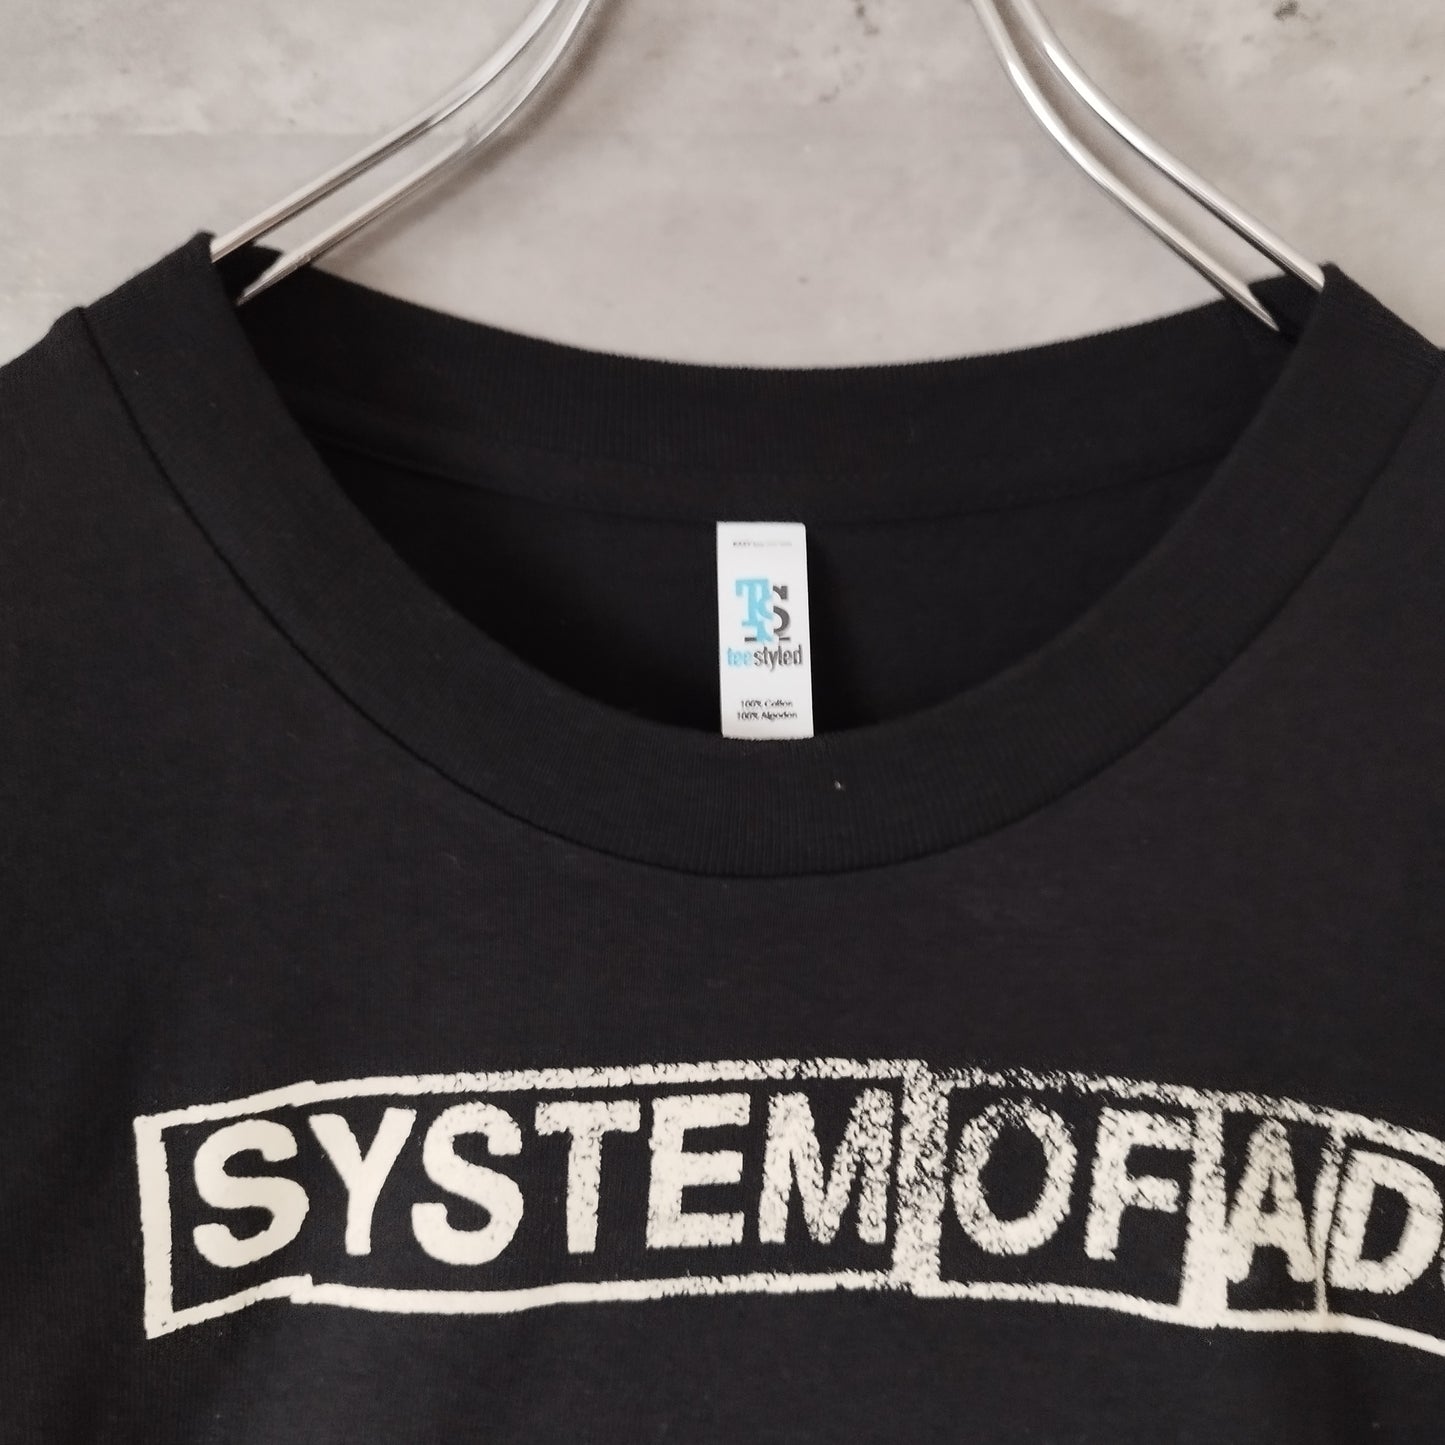 [SYSTEM OF A DOWN]  print t-shirt